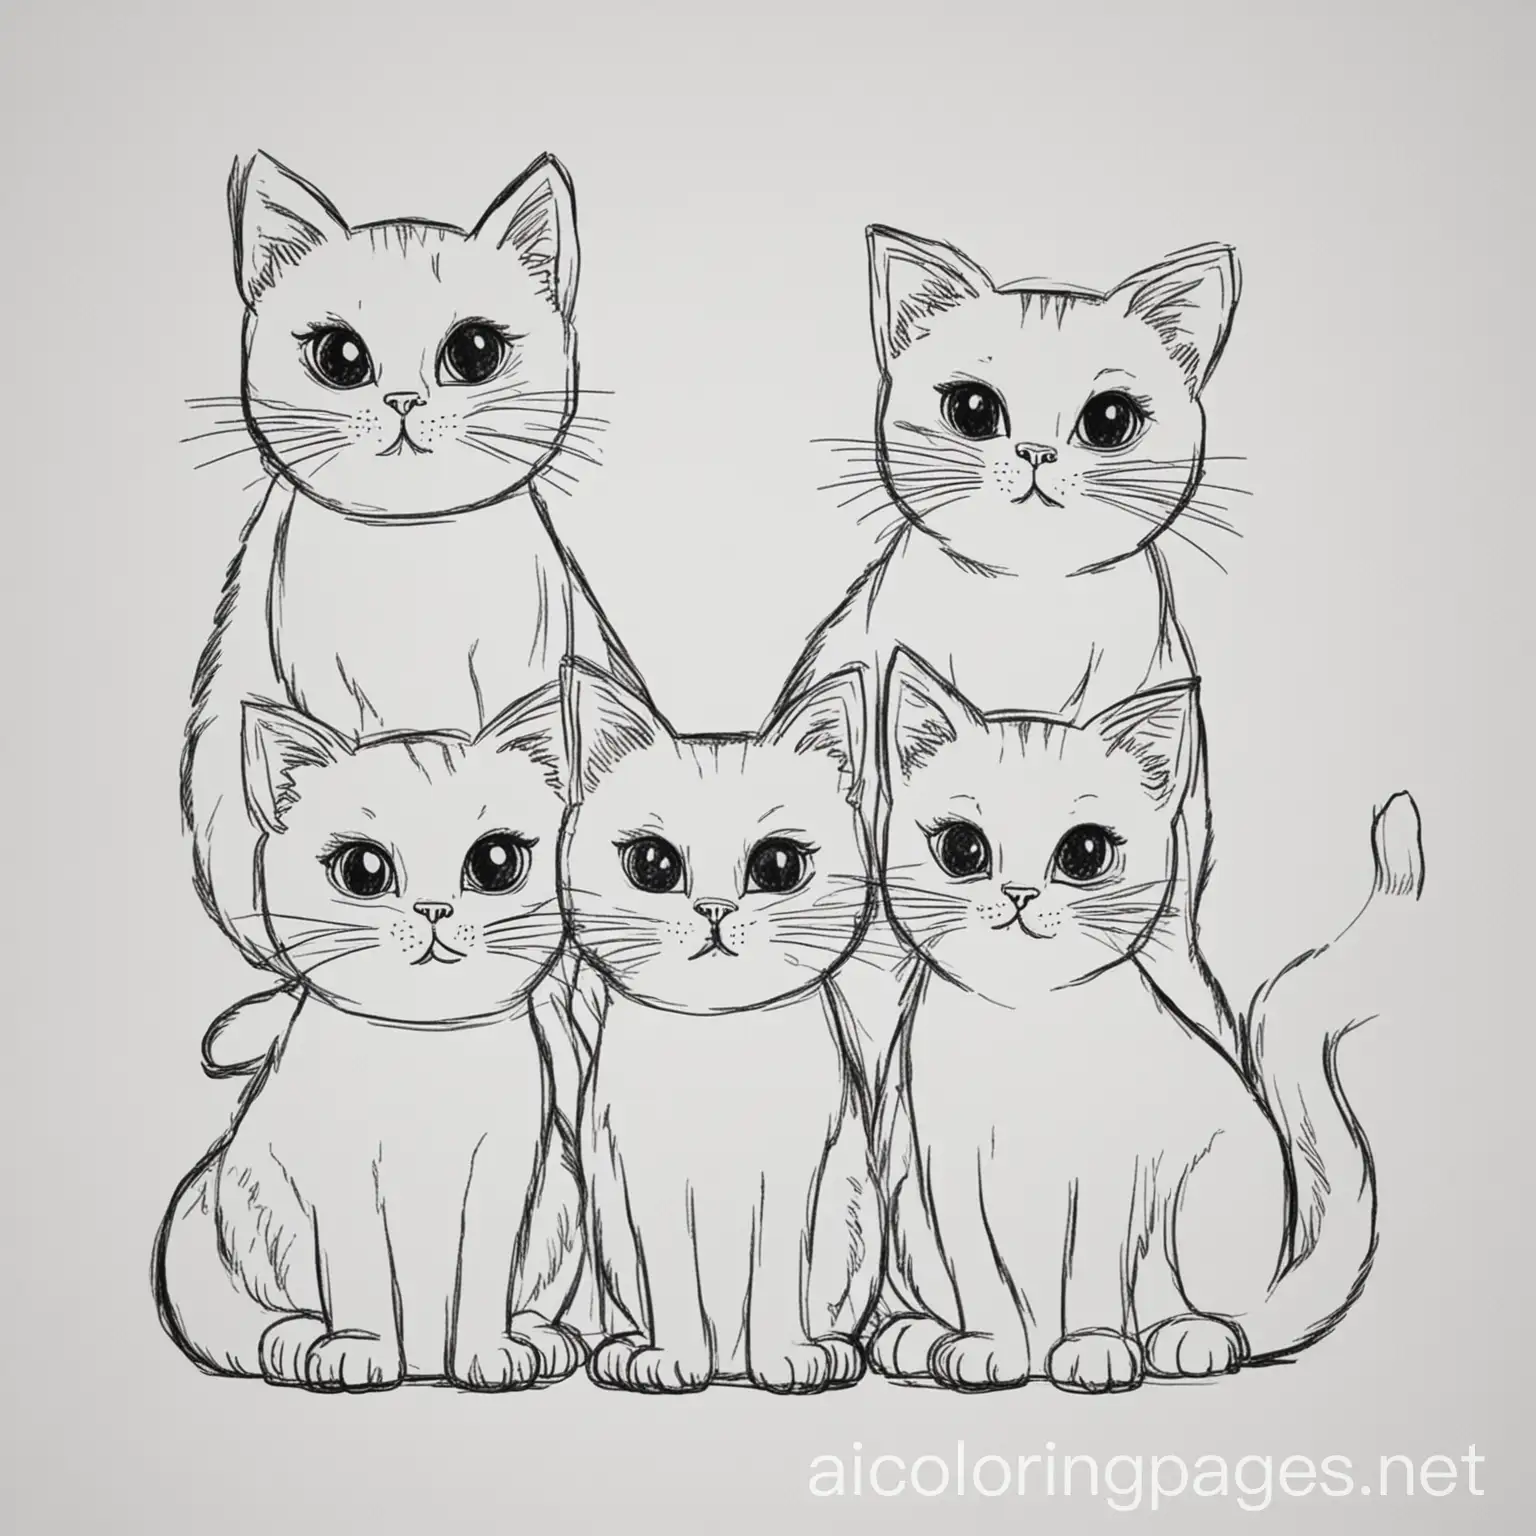 cats, Coloring Page, black and white, line art, white background, Simplicity, Ample White Space. The background of the coloring page is plain white to make it easy for young children to color within the lines. The outlines of all the subjects are easy to distinguish, making it simple for kids to color without too much difficulty